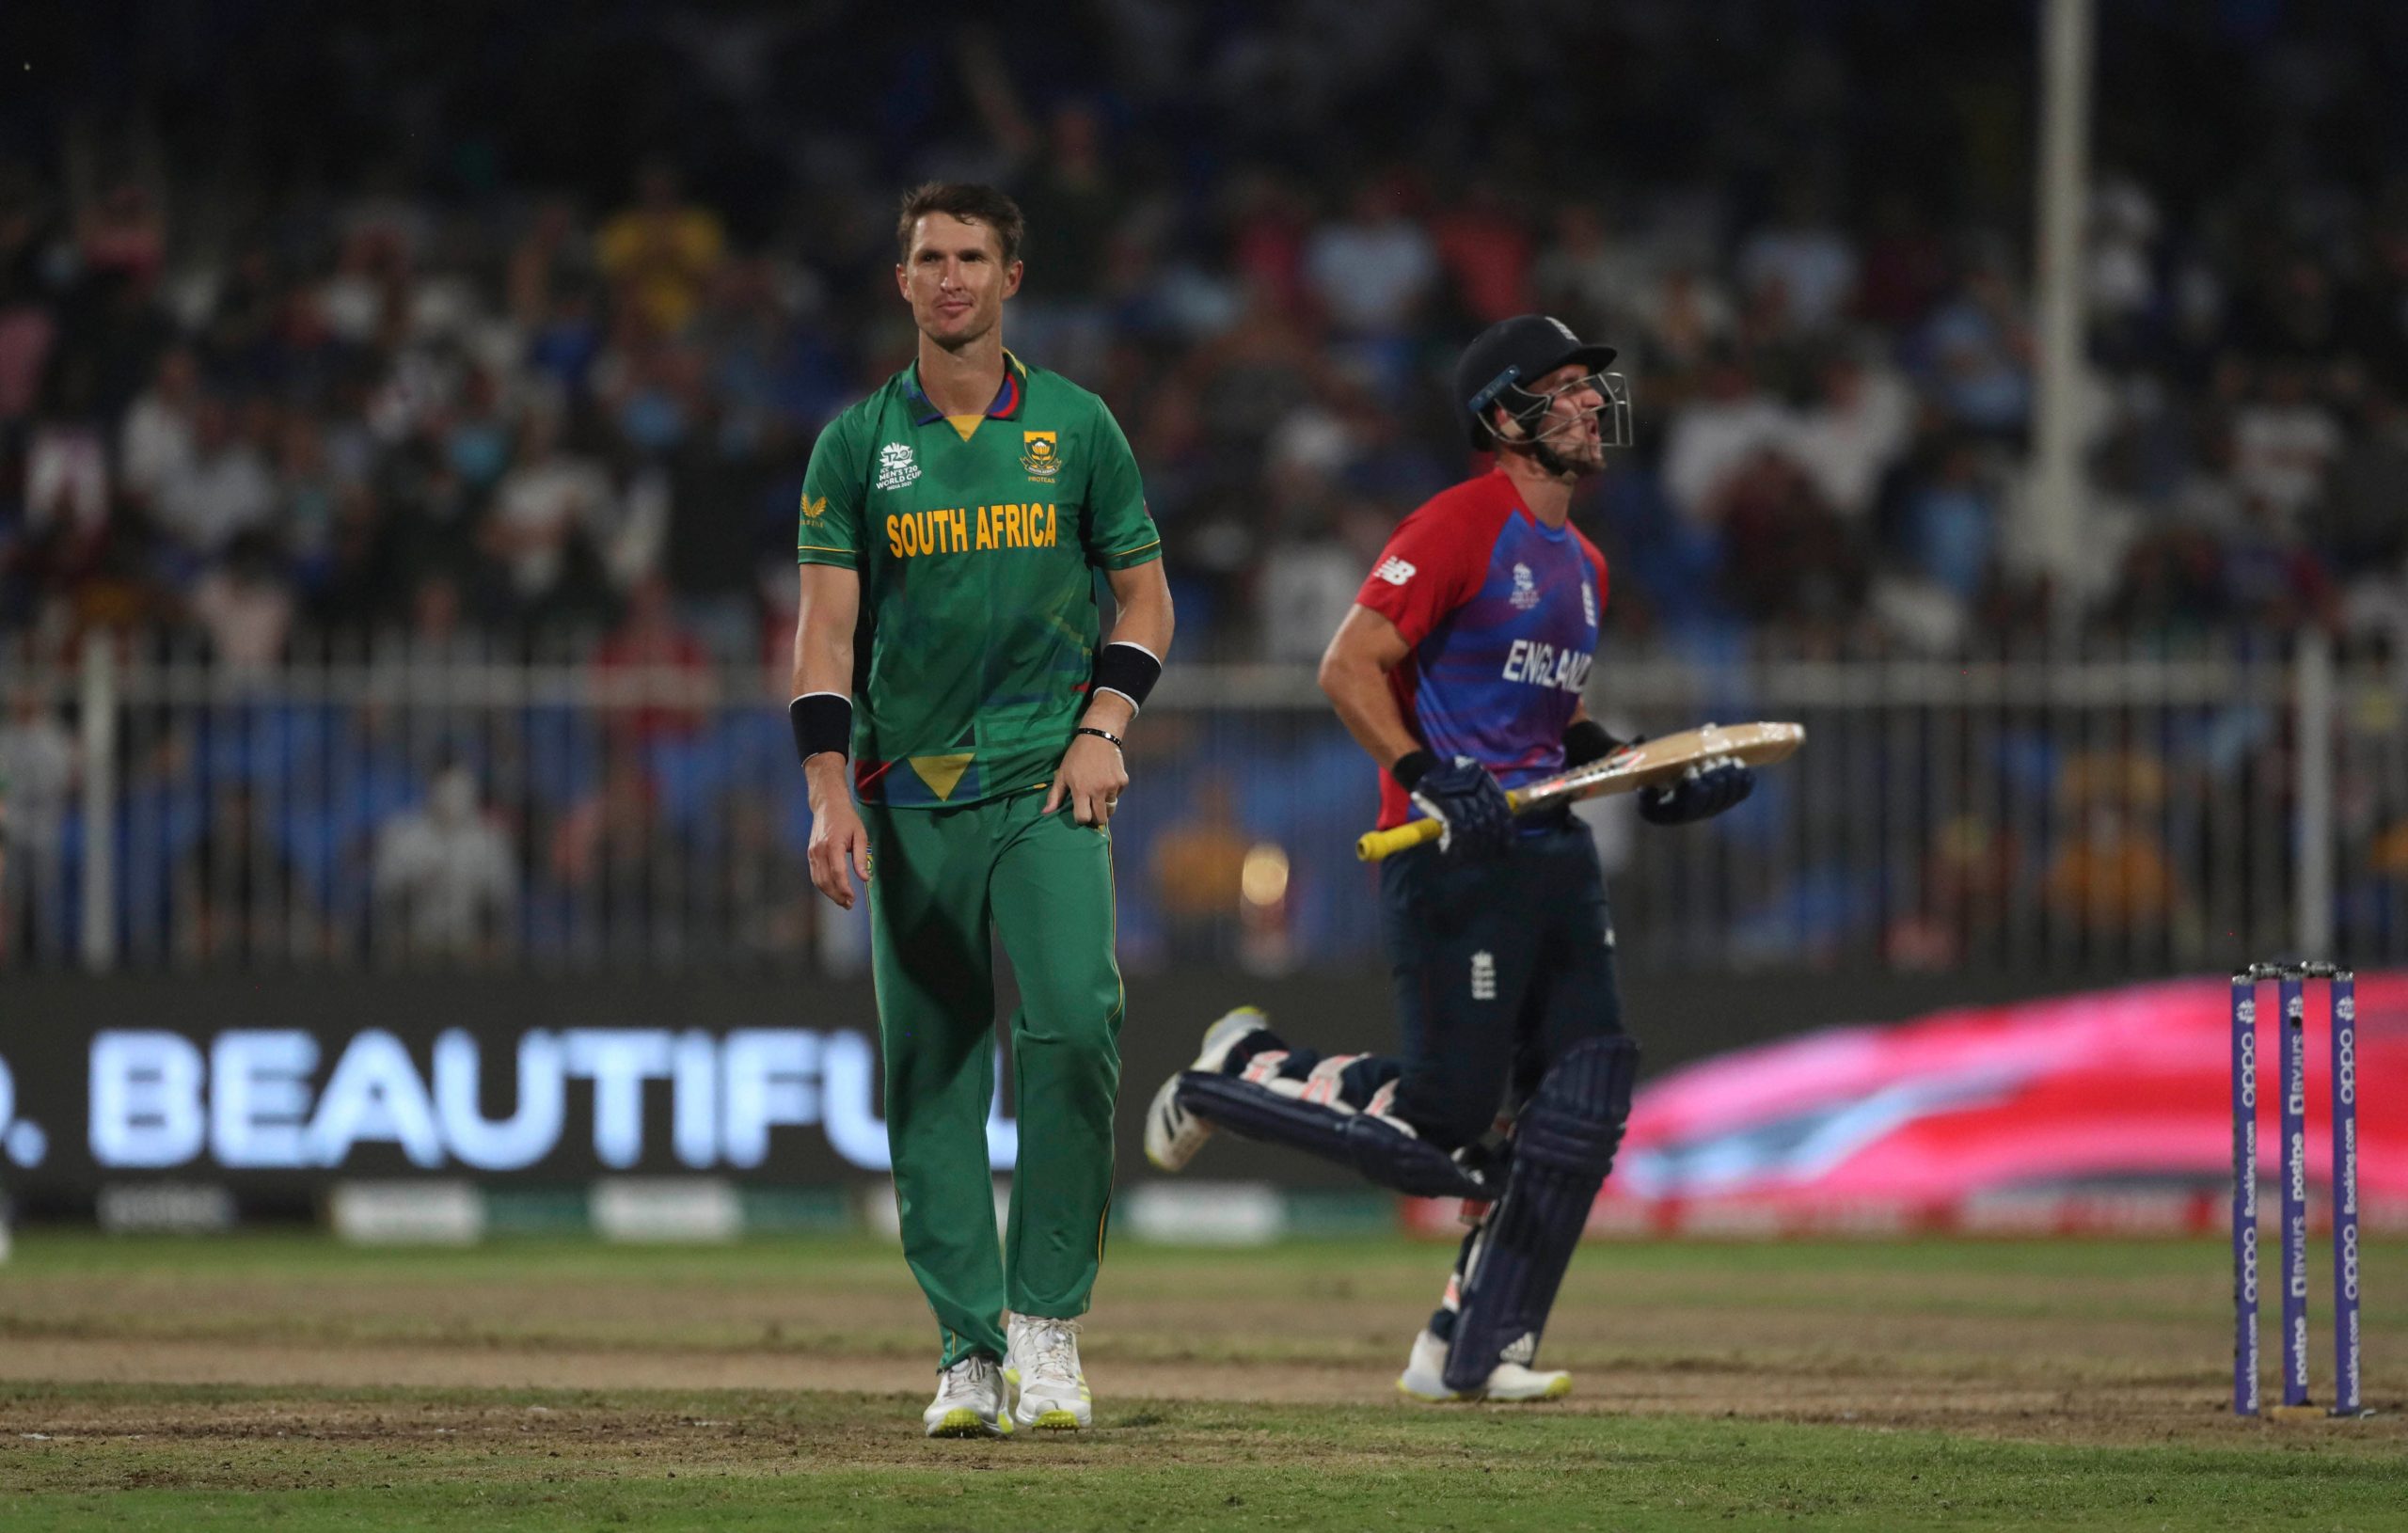 Loss keeps us grounded: England’s Mark Wood after South Africa defeat